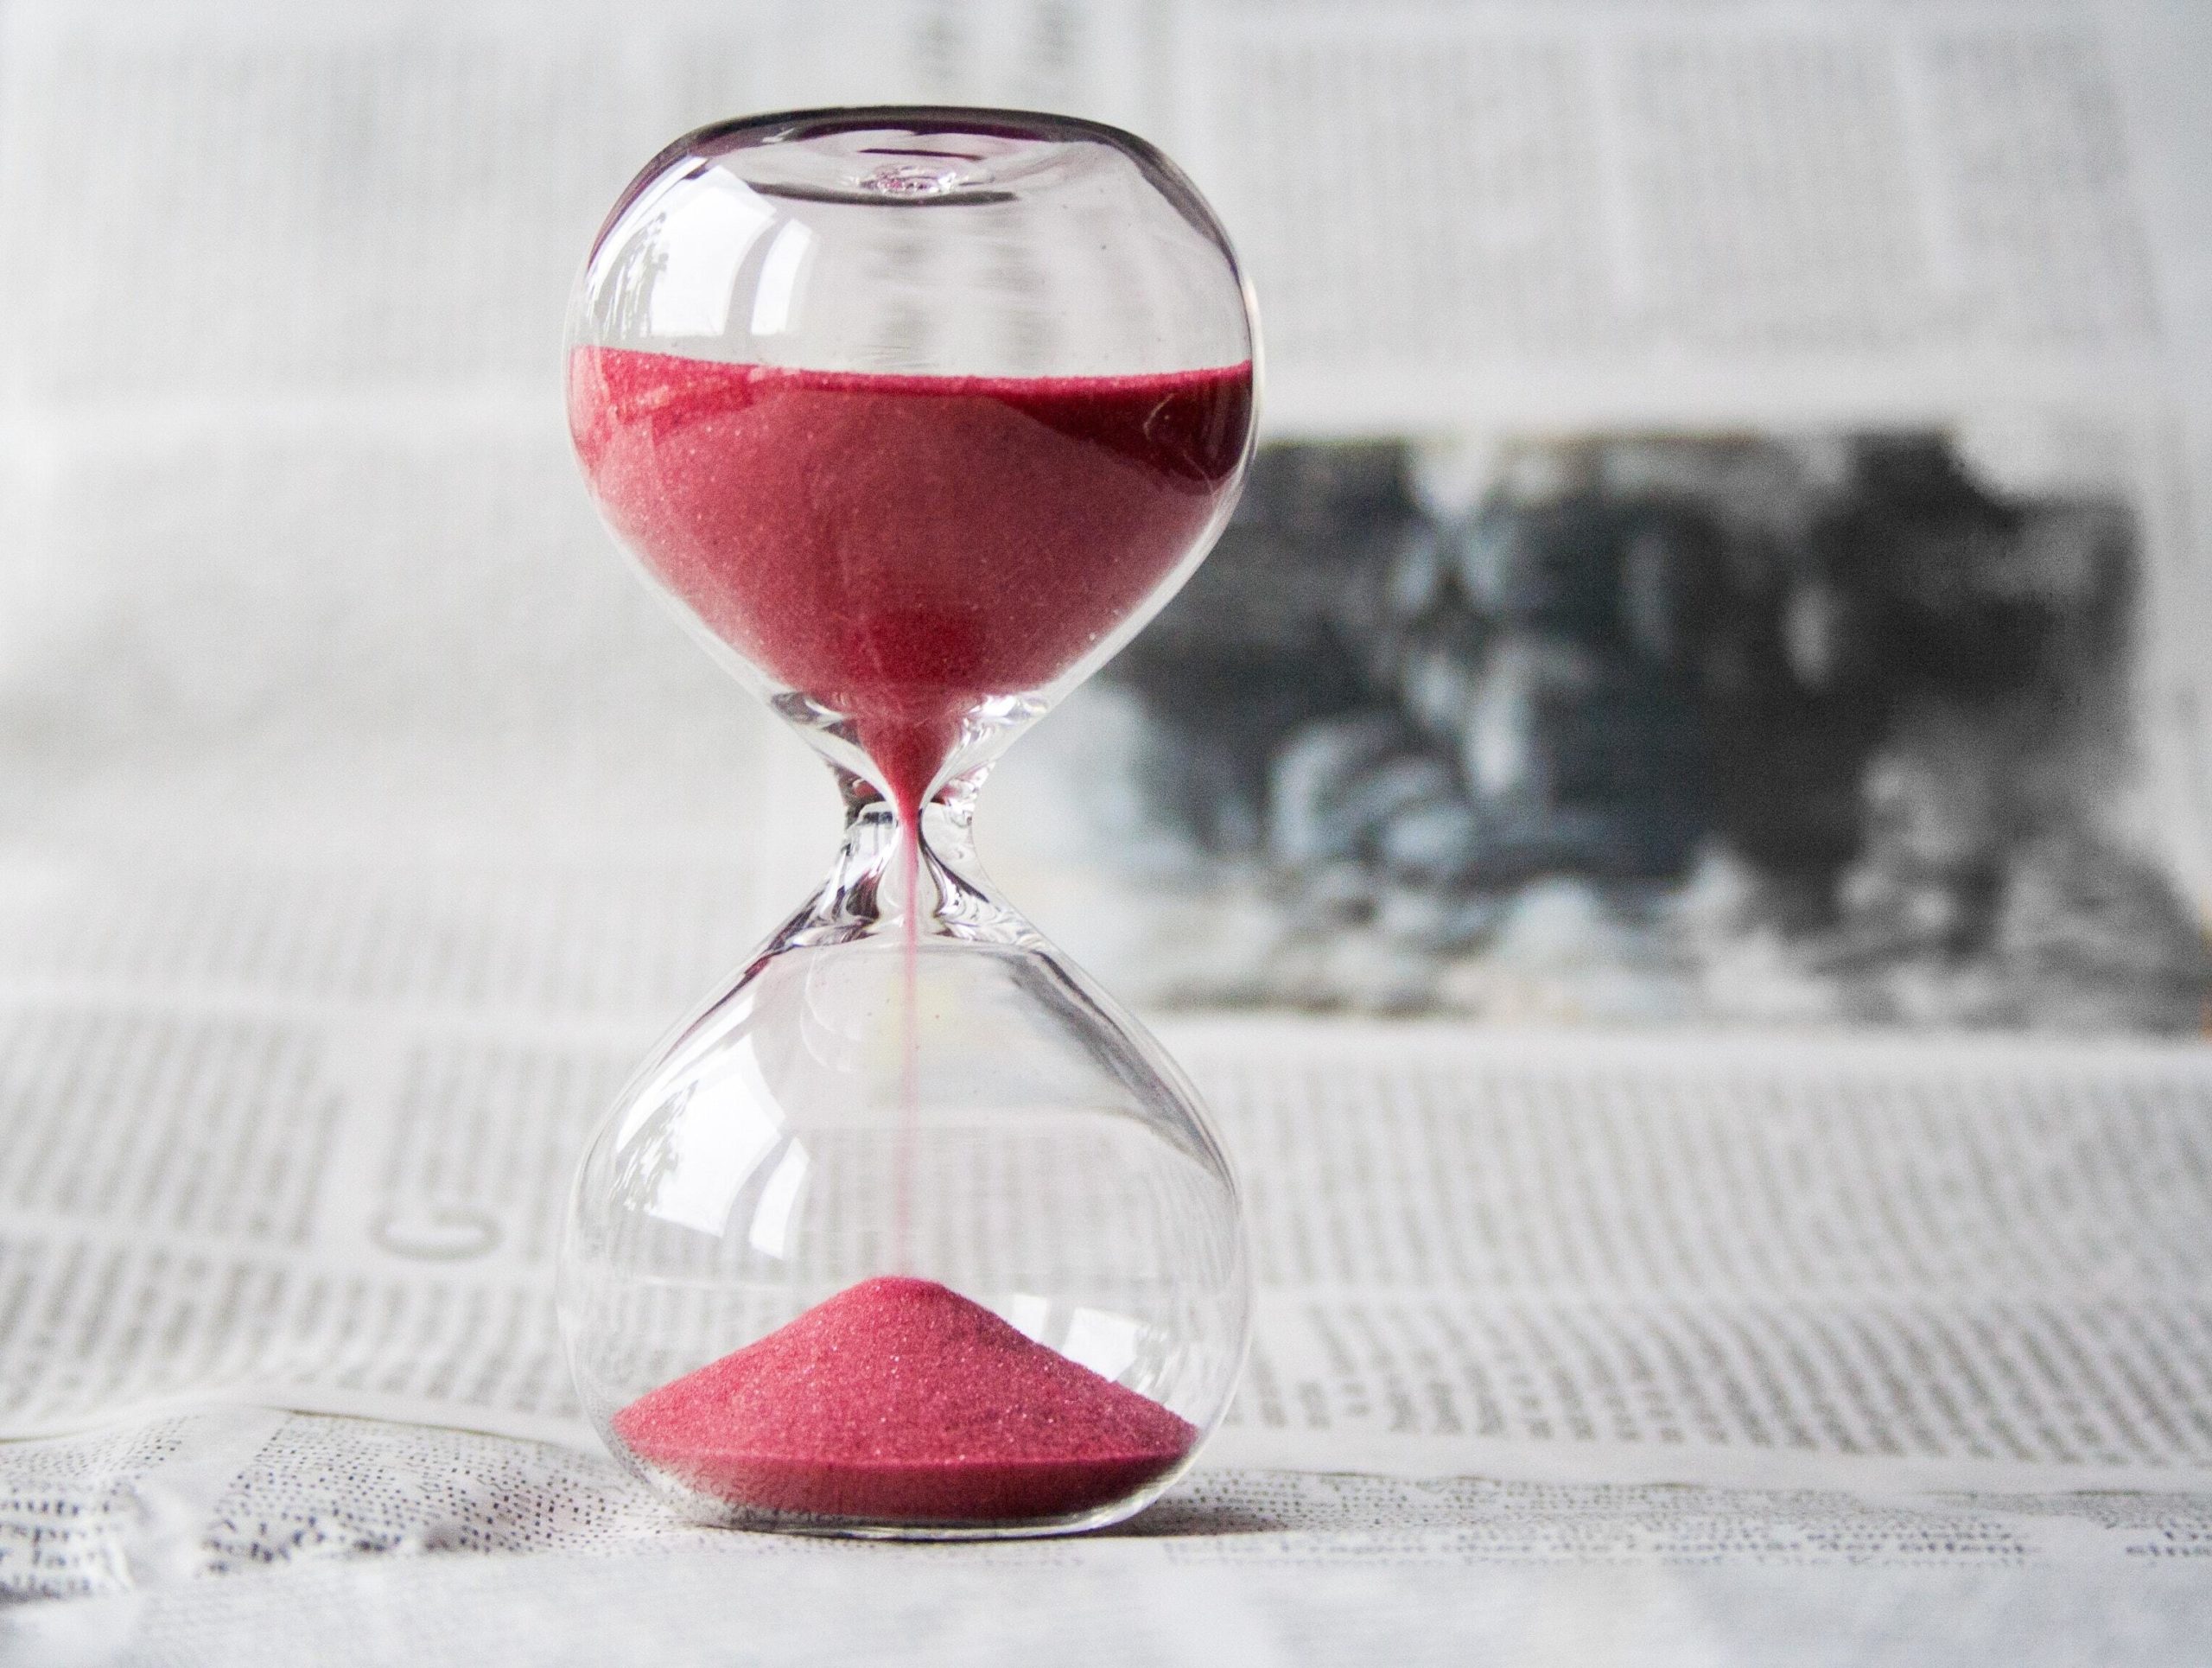 An hourglass is filled with pink sand